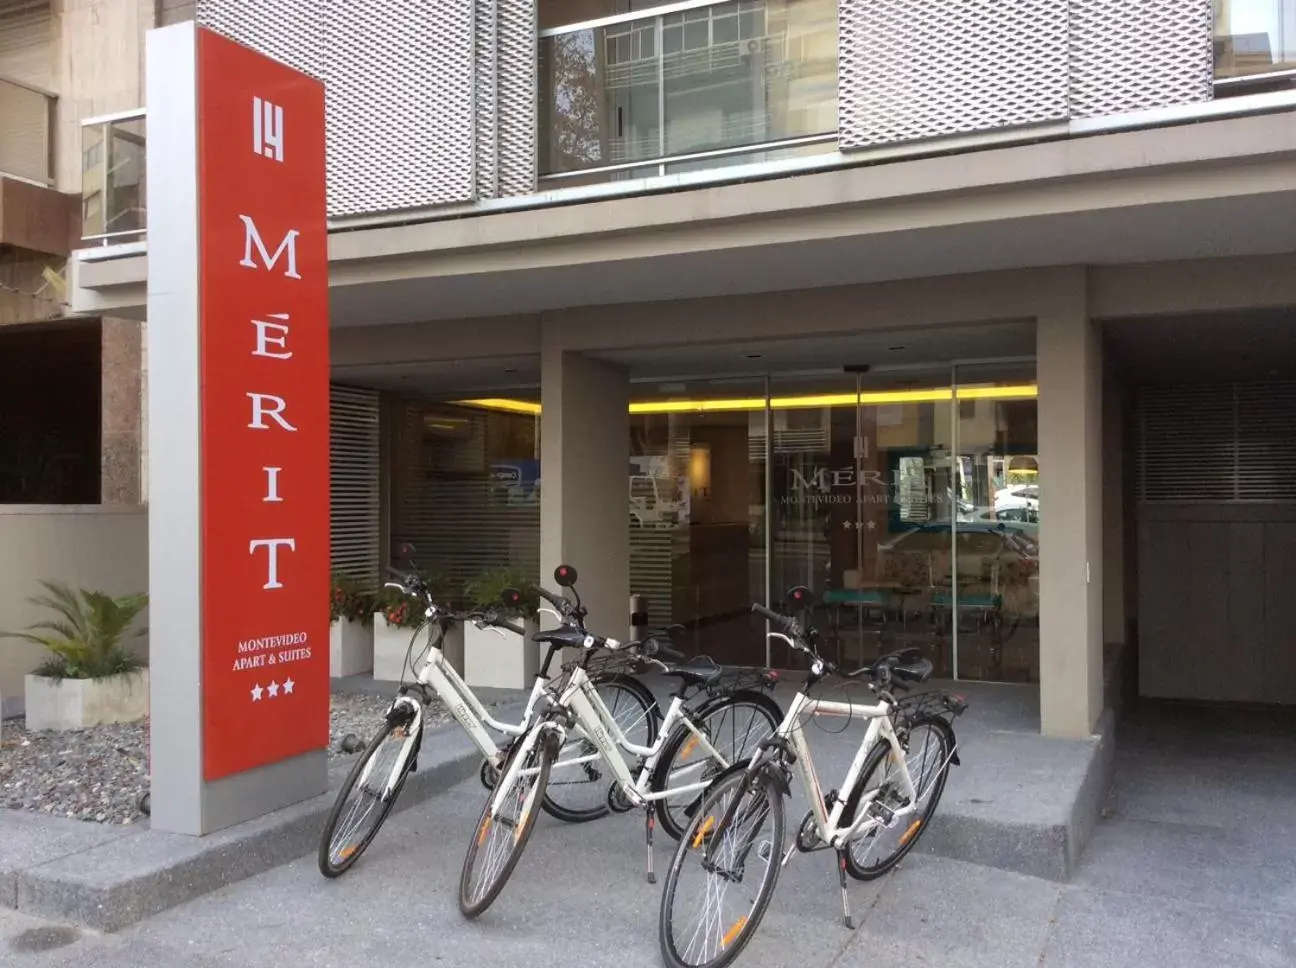 Cycling in Mérit Montevideo Apart & Suites